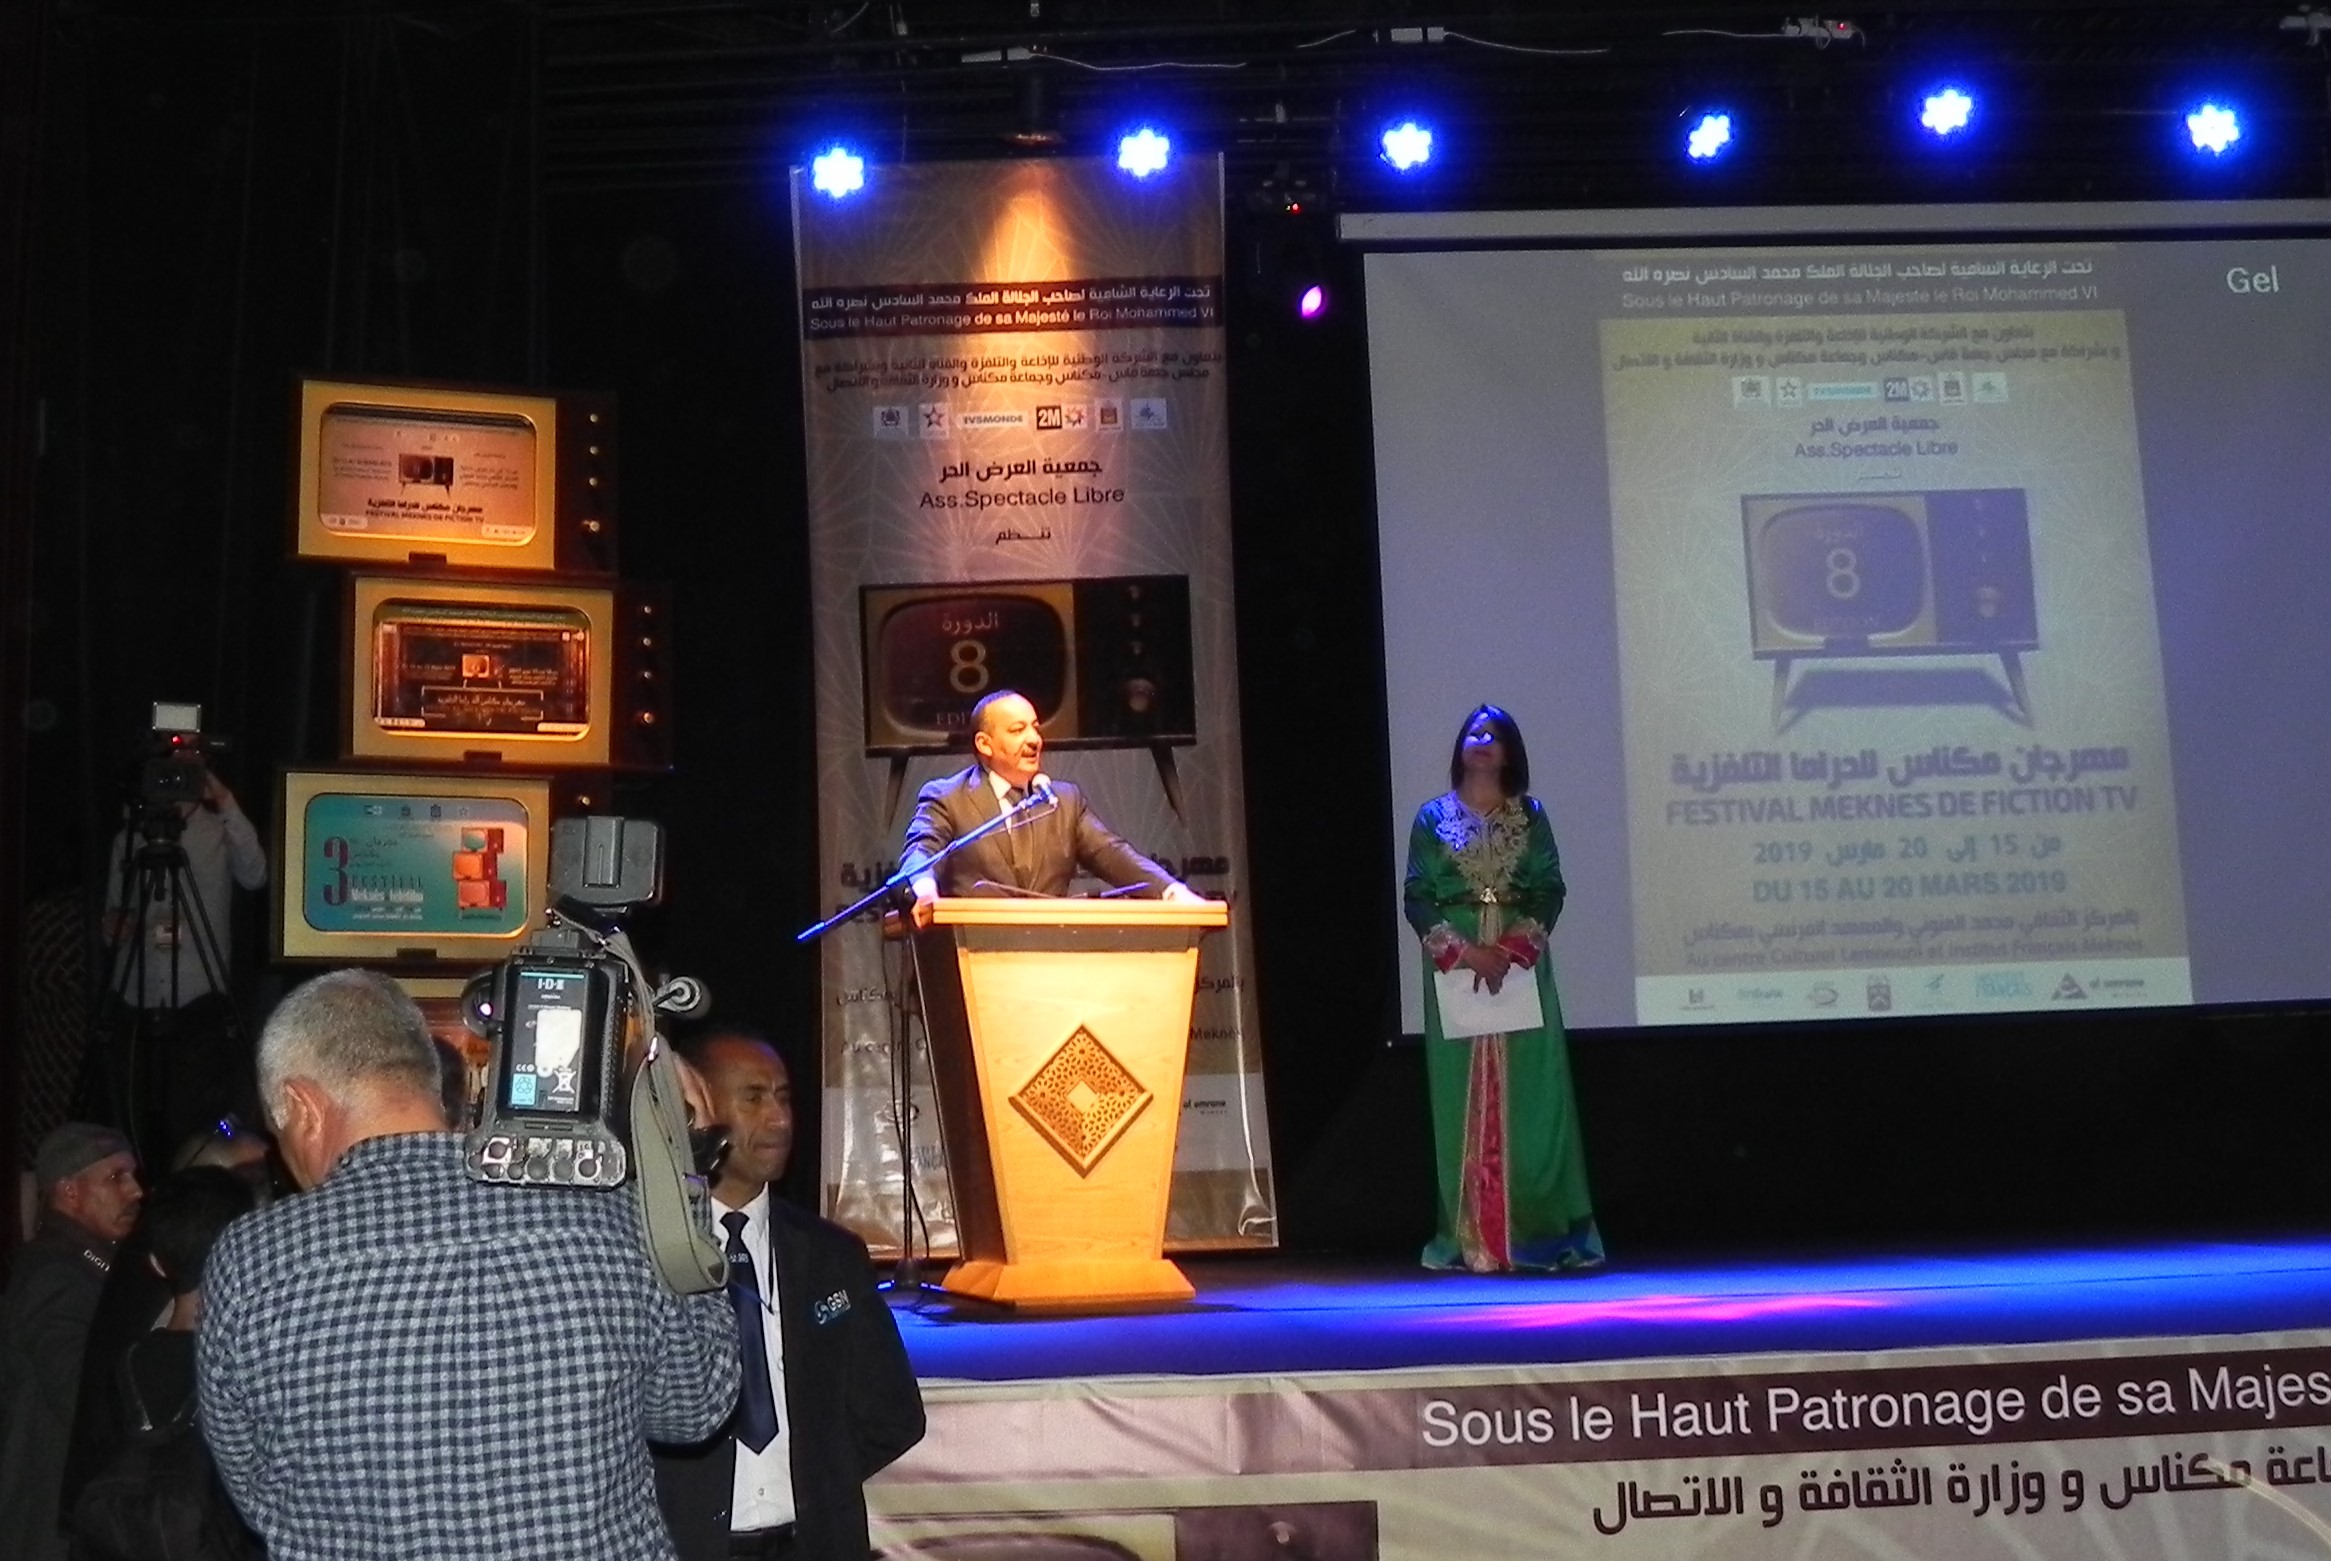 Moroccan Minister of Culture and Communication Mohammad Laaraj addresses the festival